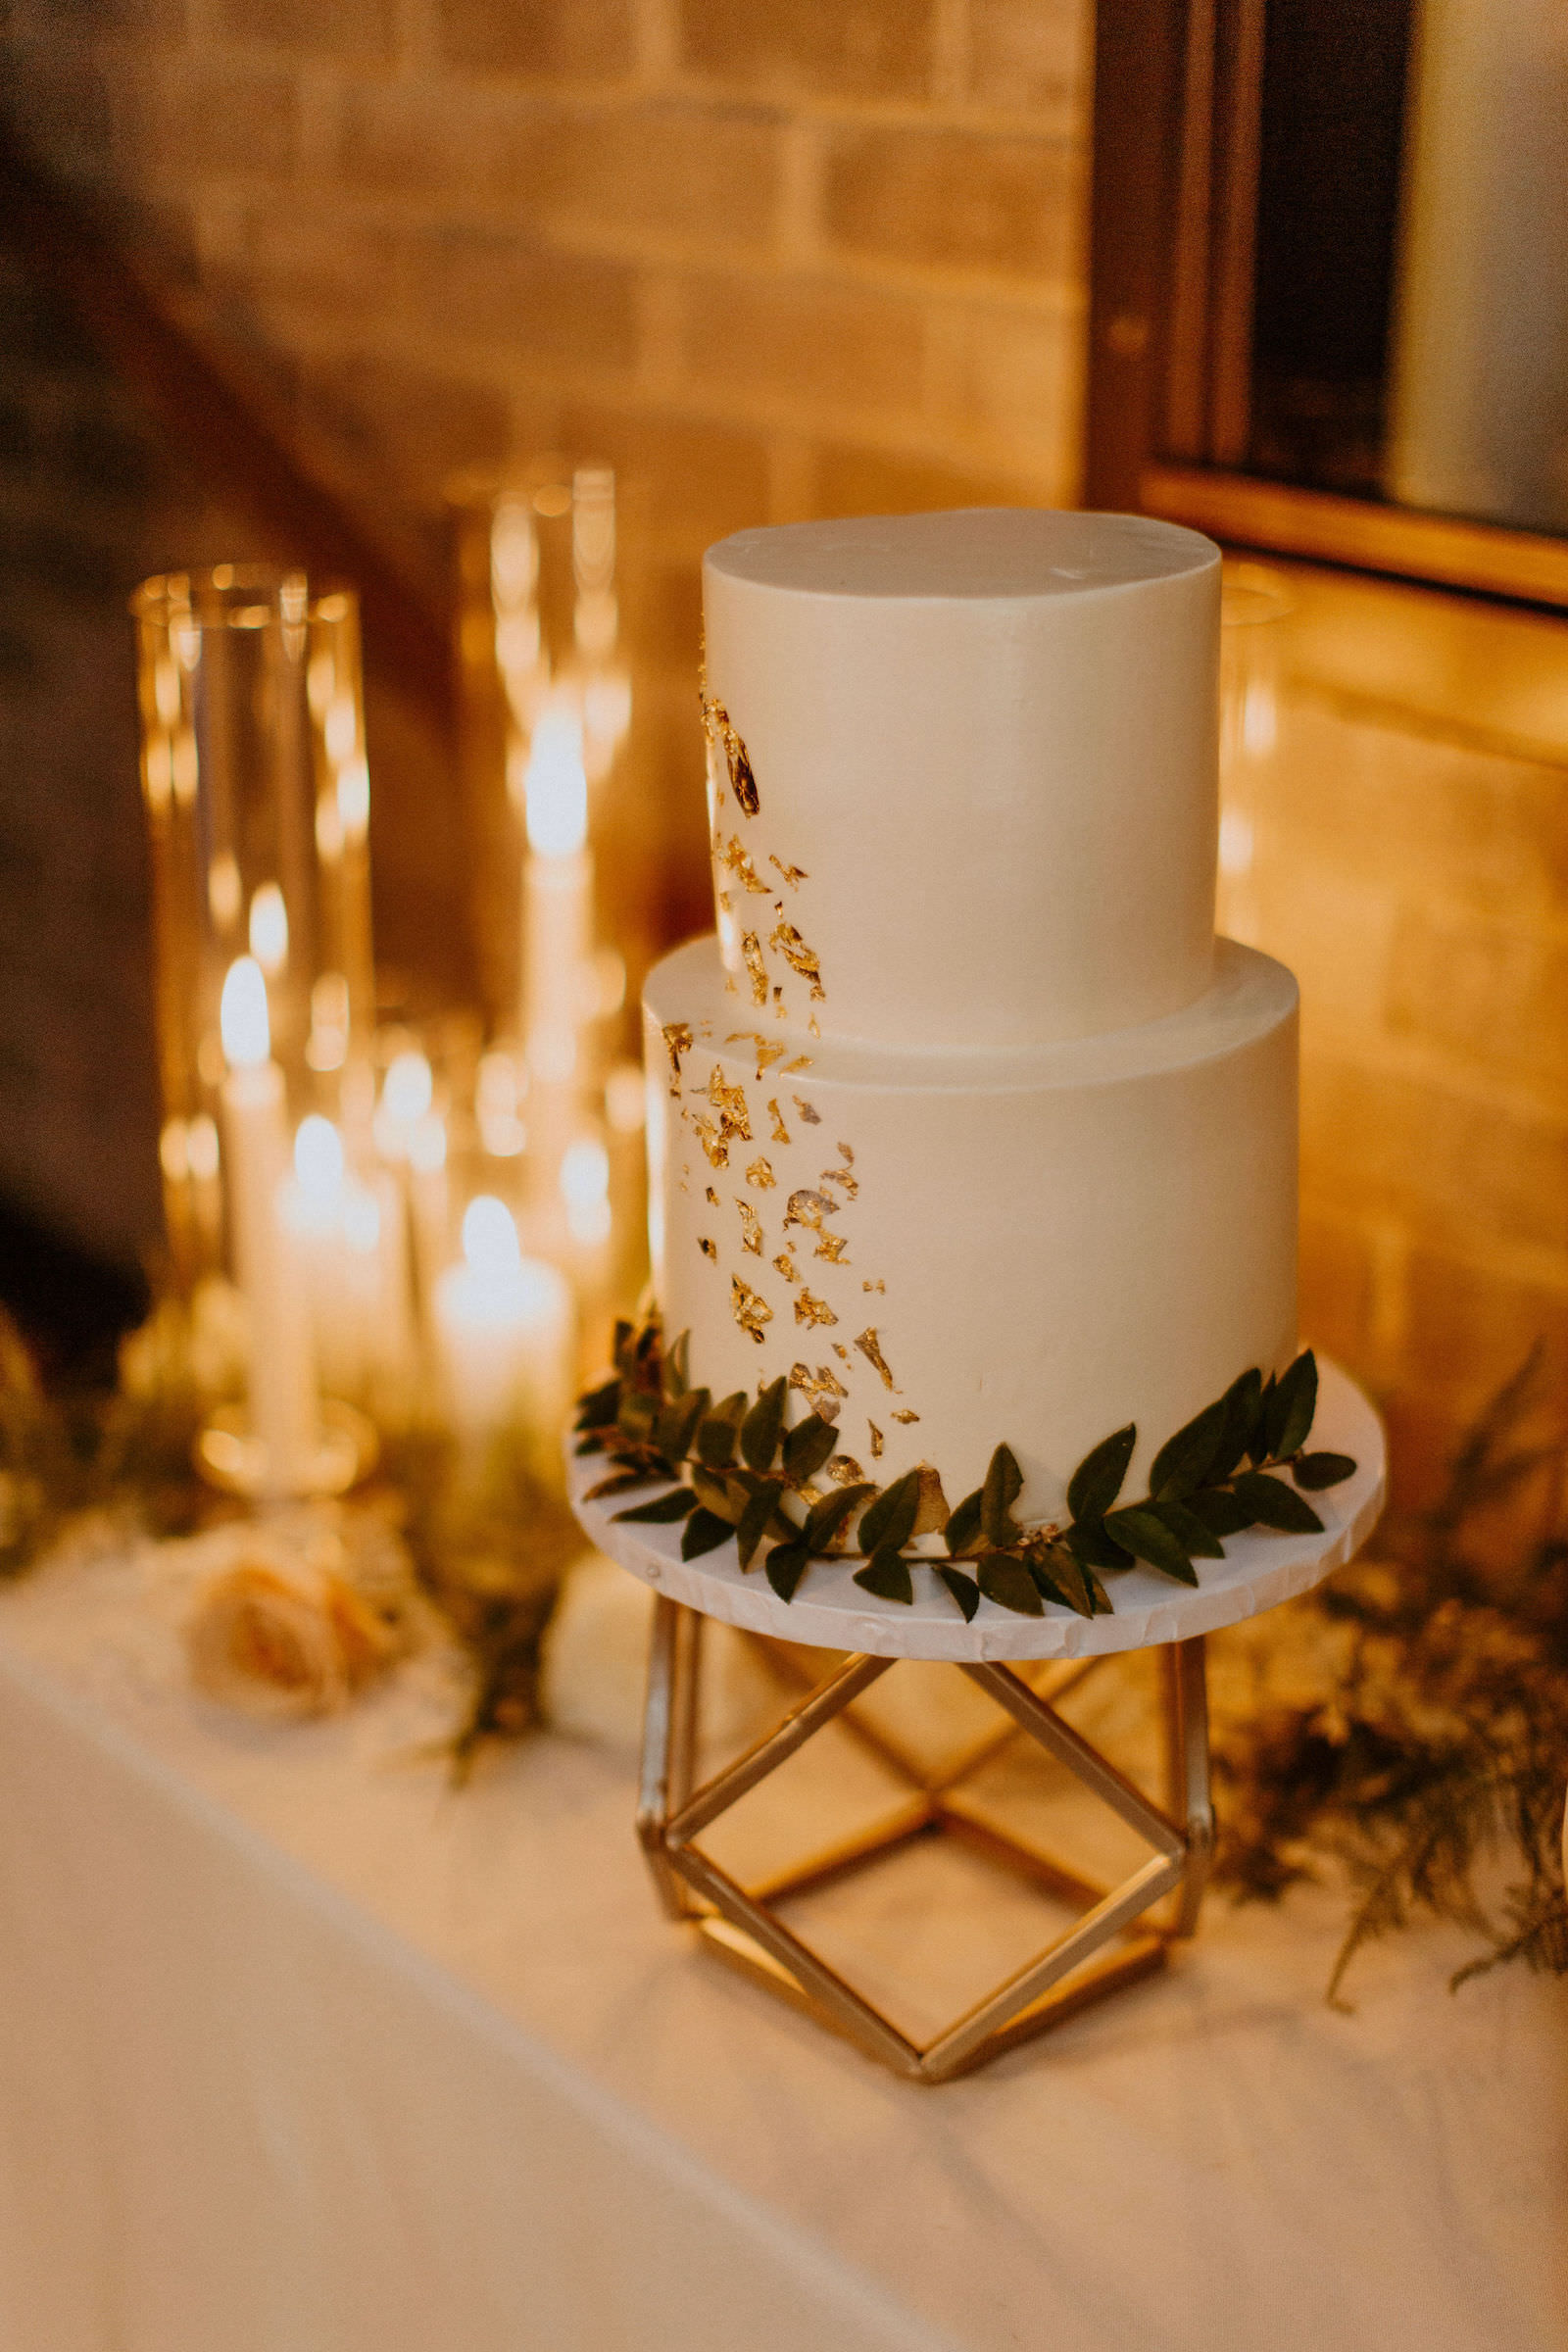 Two Tier Wedding Cake Cream with Gold Detail and Greenery Detail | Florida Bakery The Artistic Whisk